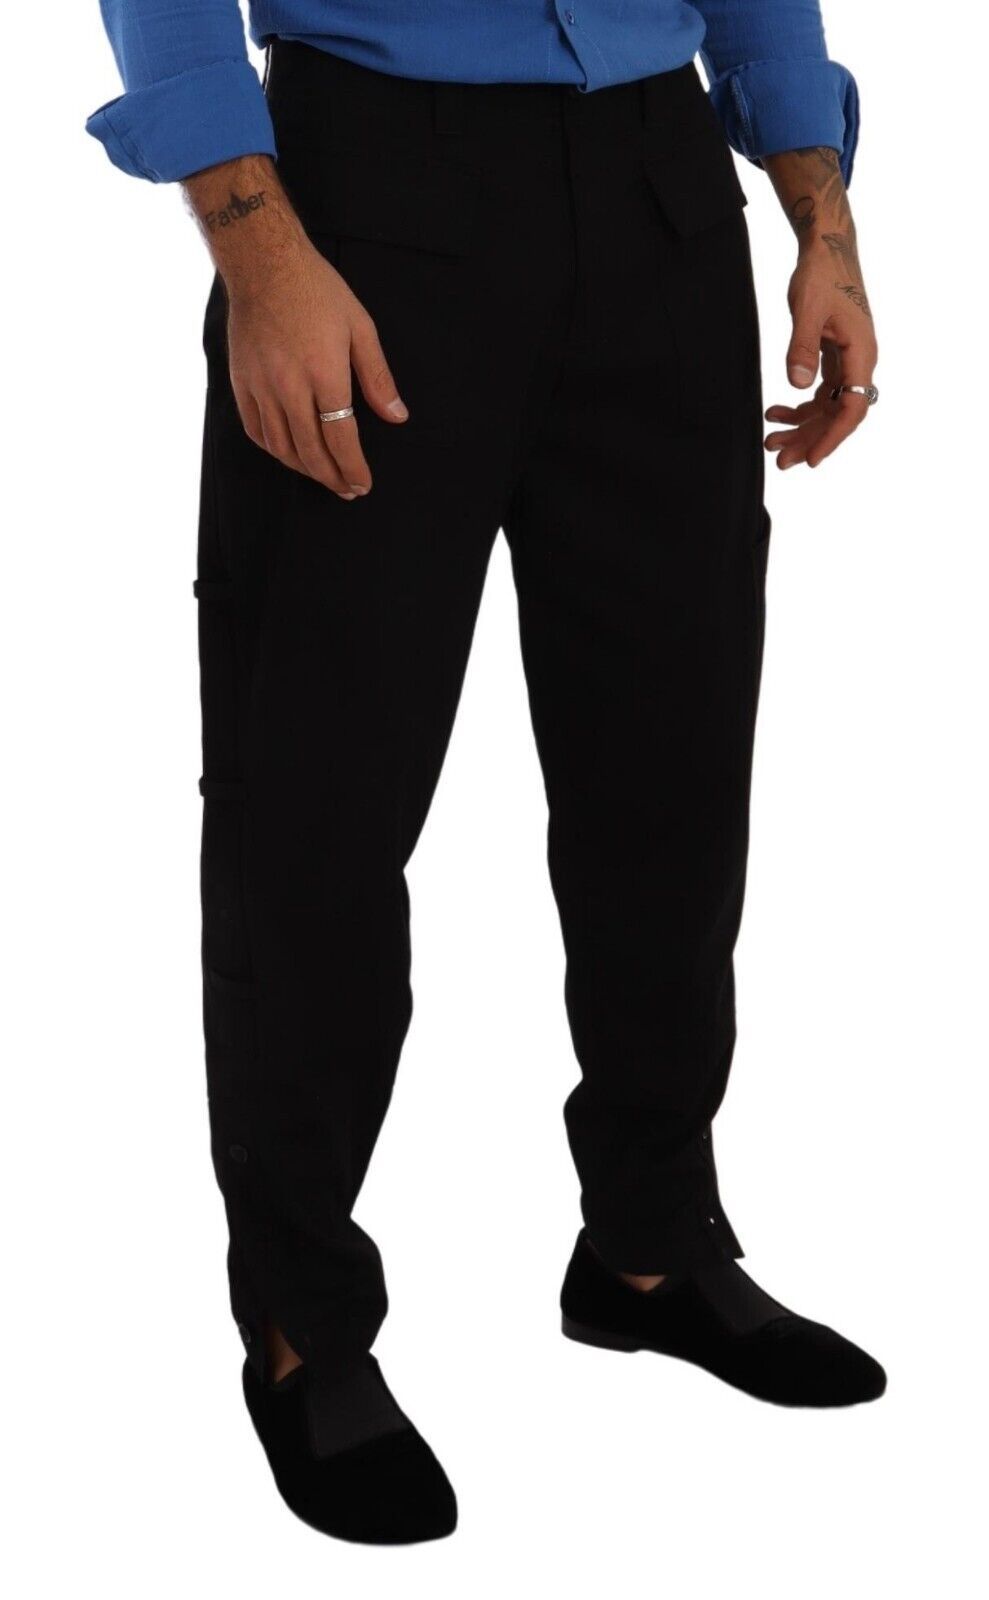 Dolce & Gabbana Chic Black Cargo Pants with Stretch Comfort